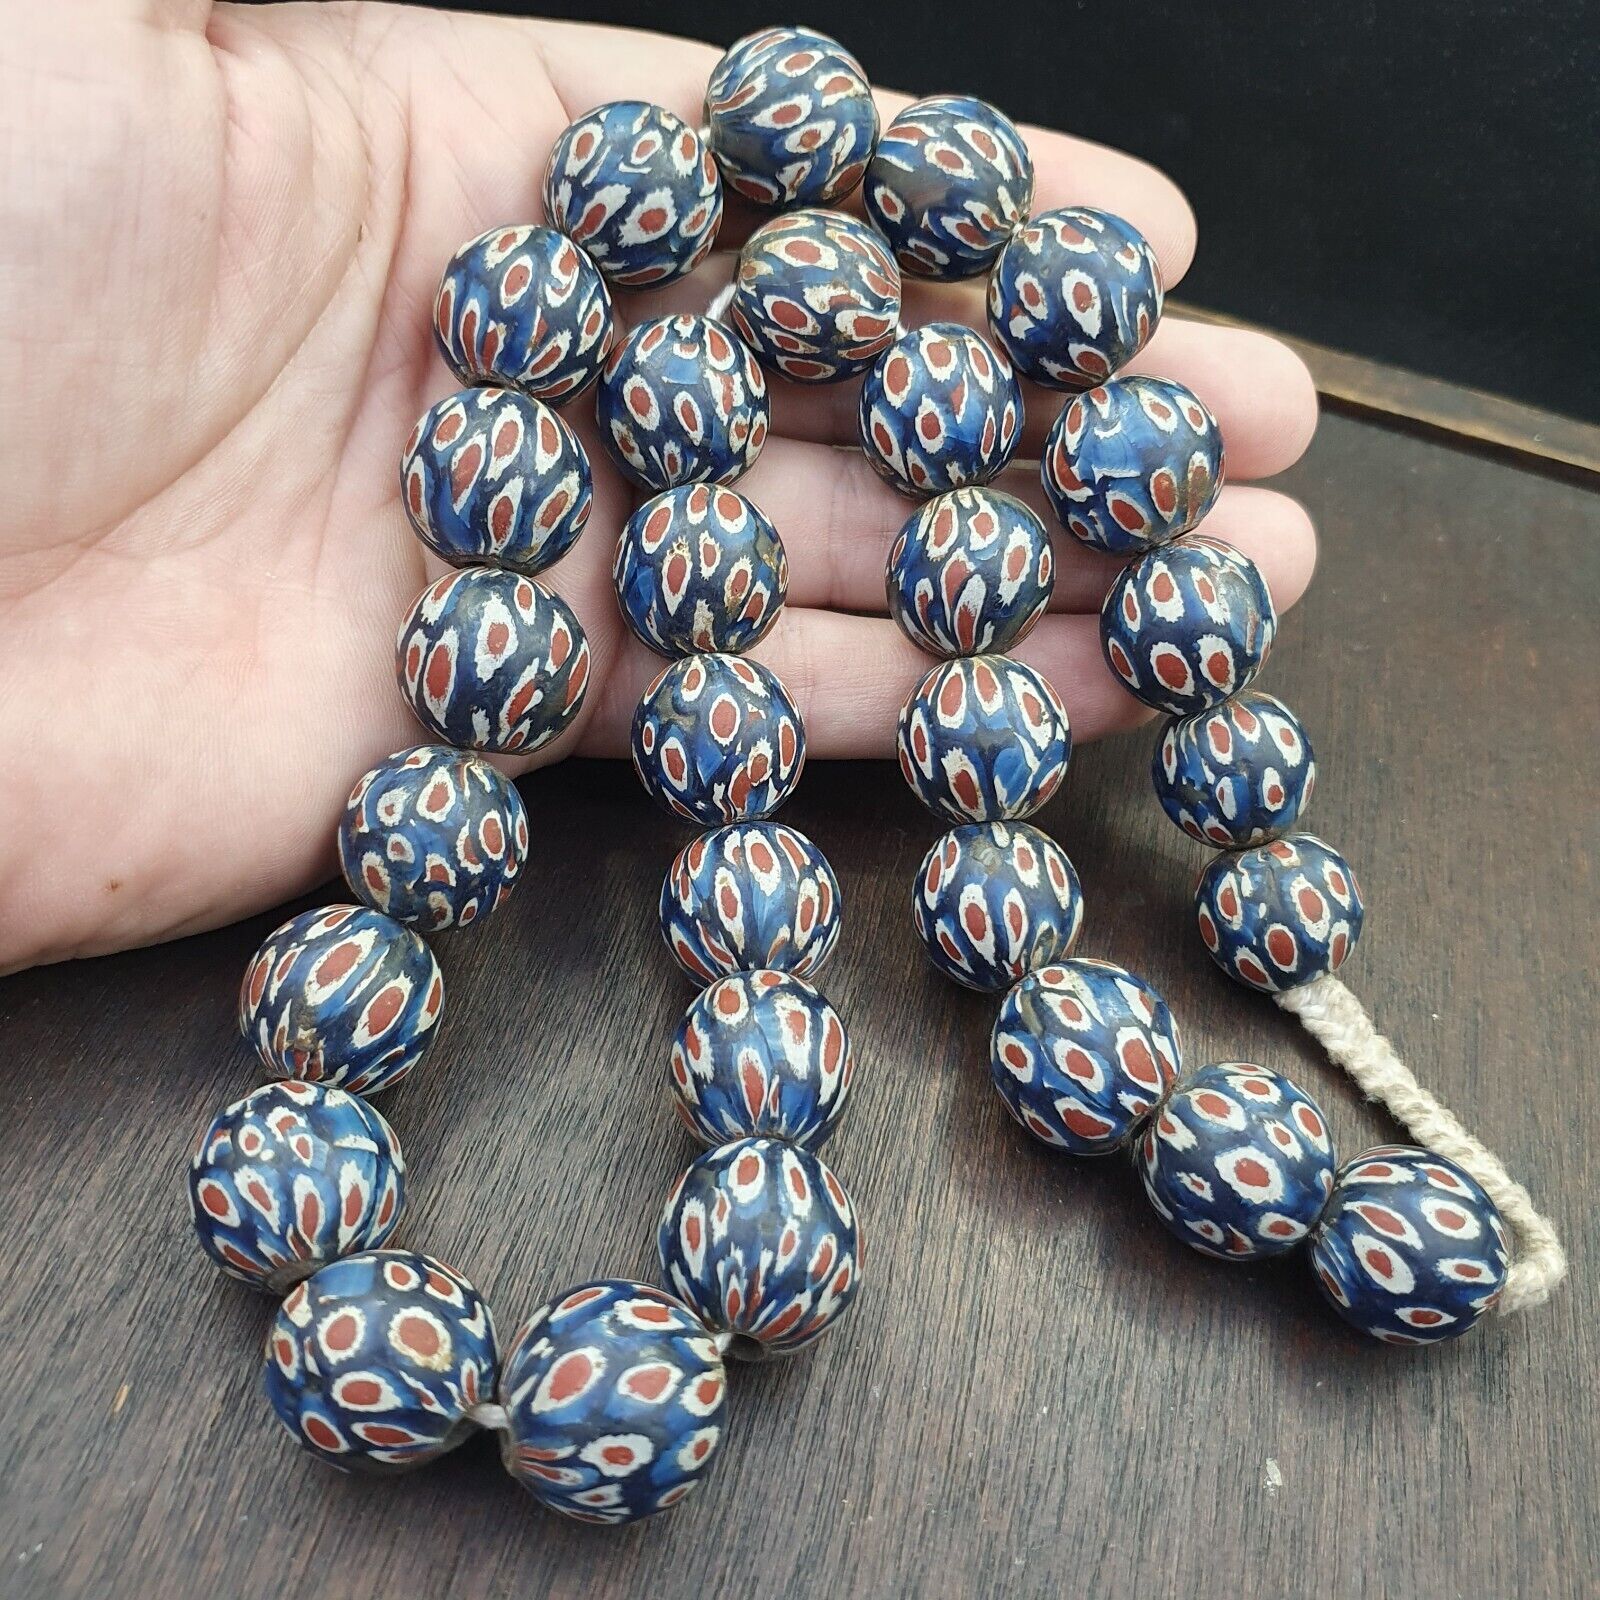 AA Vintage Antique Blues Gabri Red Eyes Glass Beads Strand 19mm